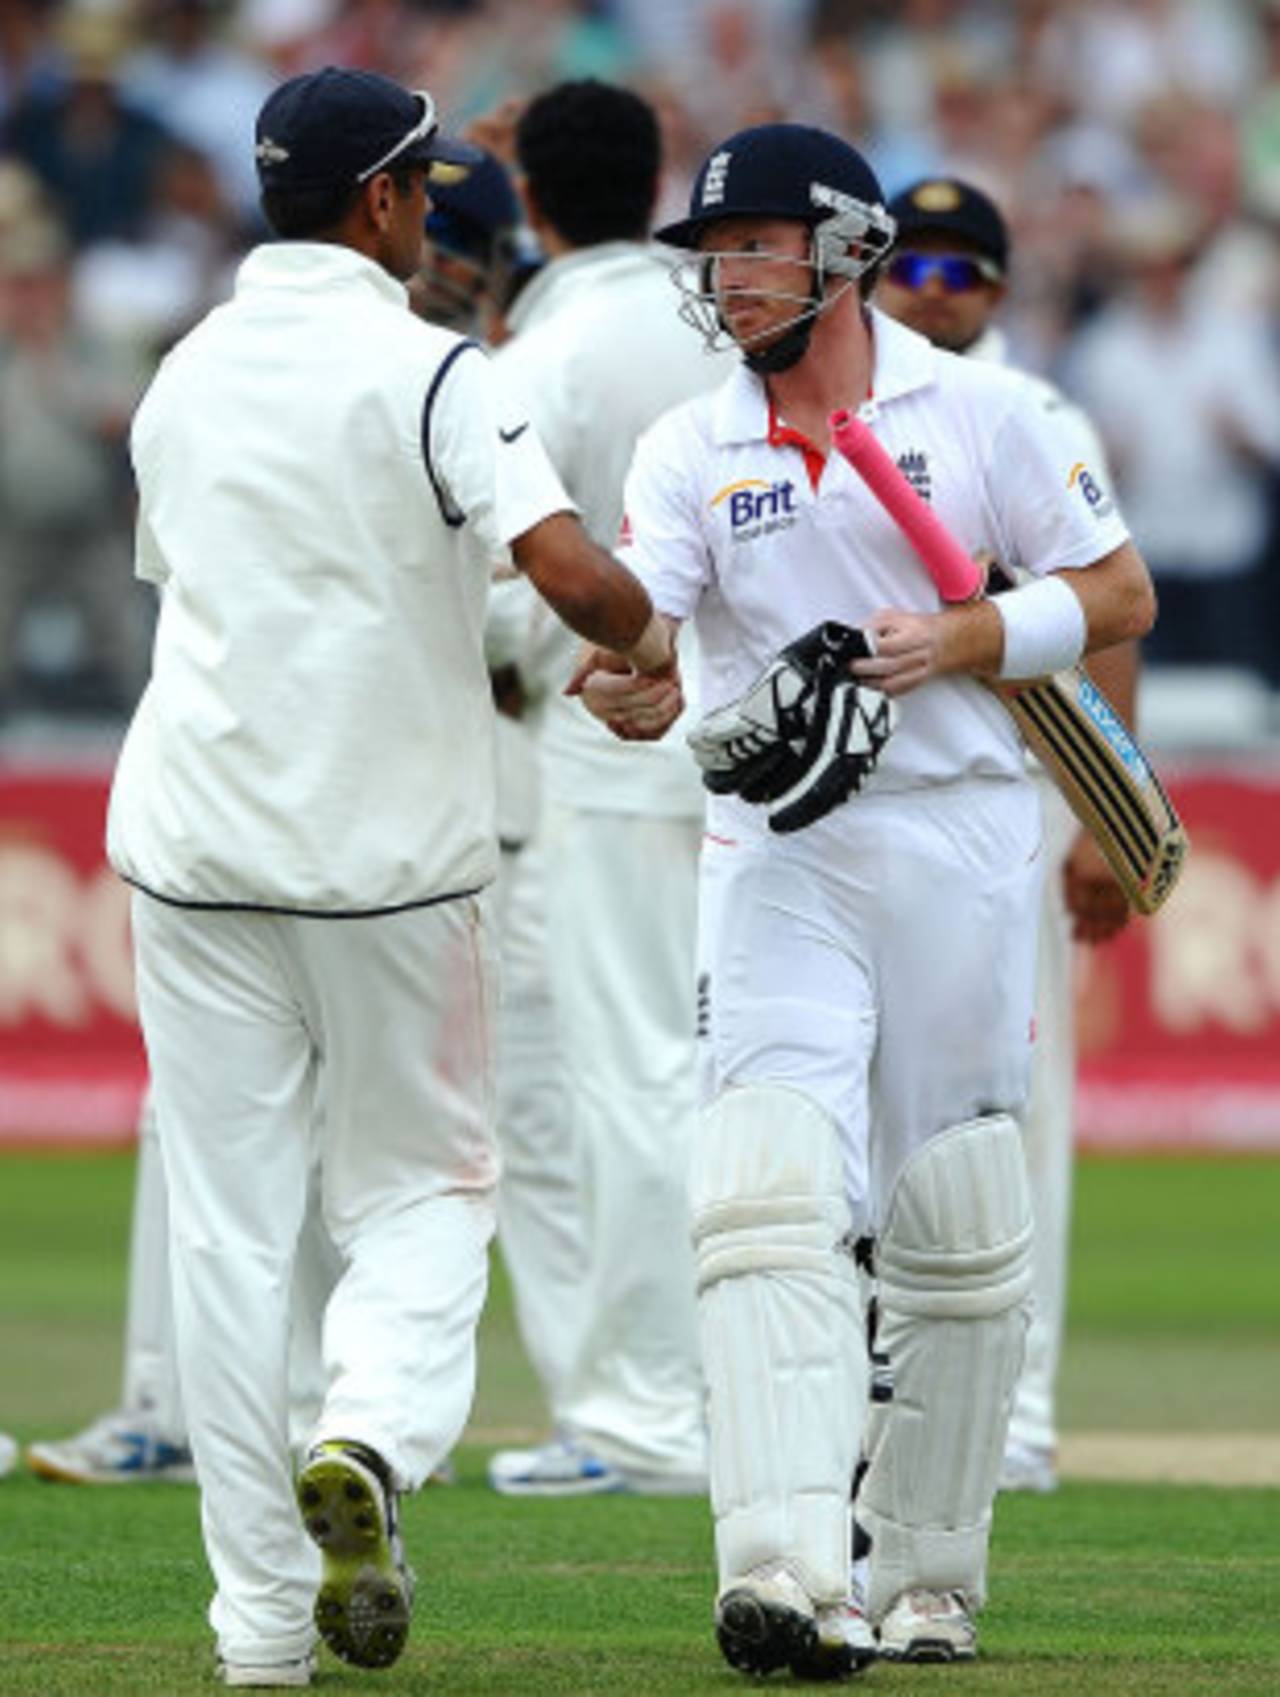 Rahul Dravid congratulates Ian Bell after Bell was dismissed for 159, England v India, 2nd npower Test, Trent Bridge, 3rd day, July 31, 2011